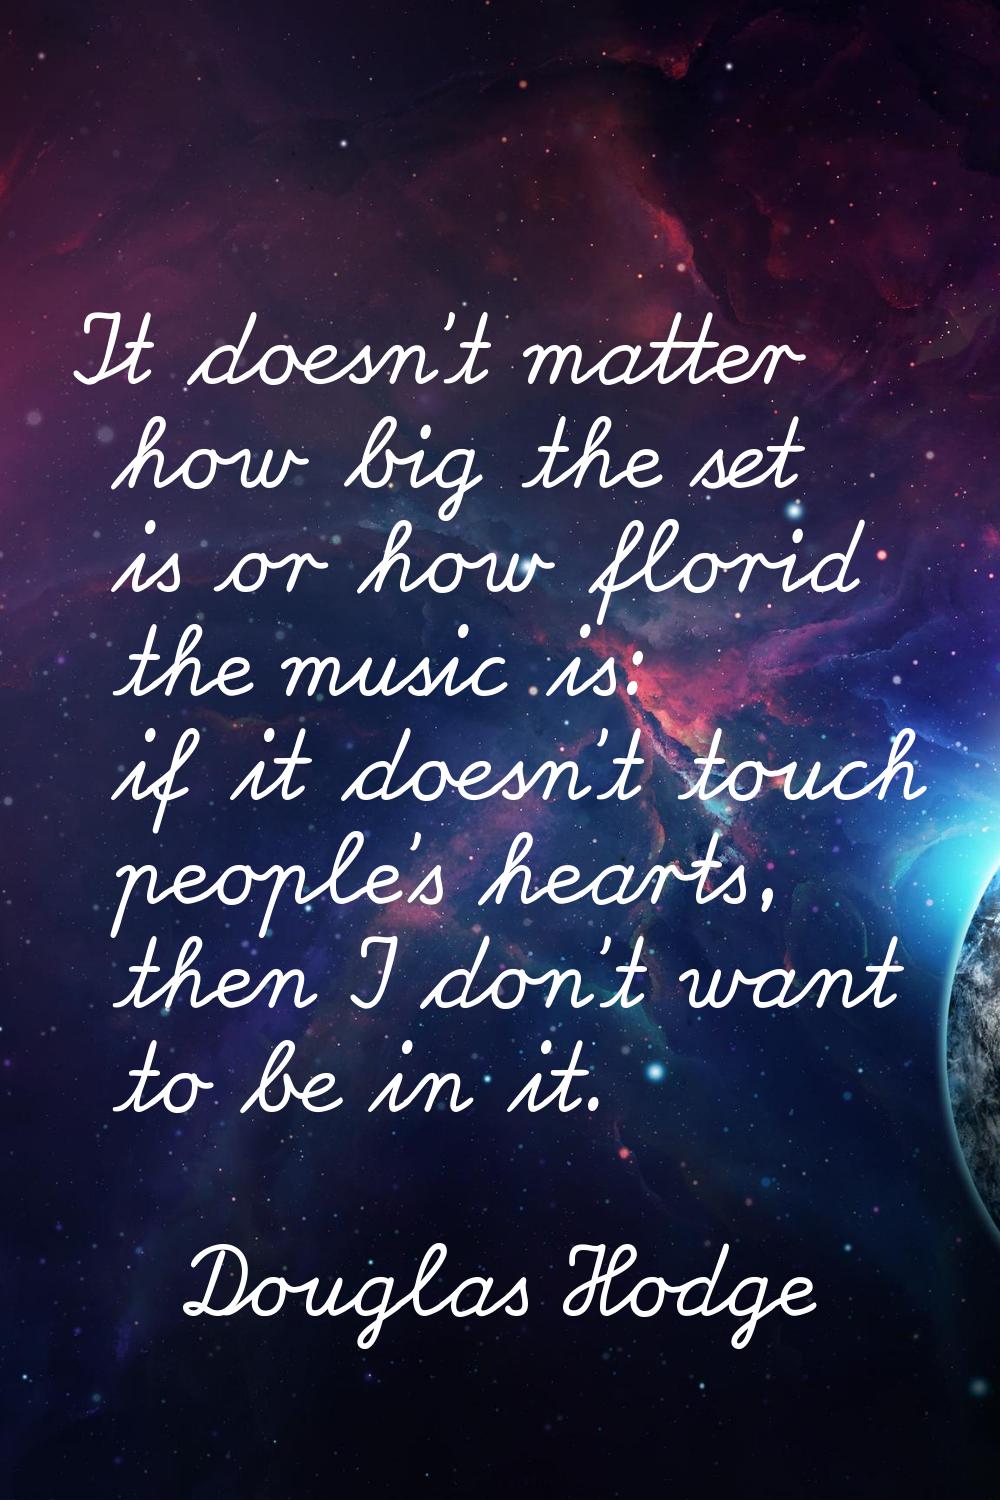 It doesn't matter how big the set is or how florid the music is: if it doesn't touch people's heart